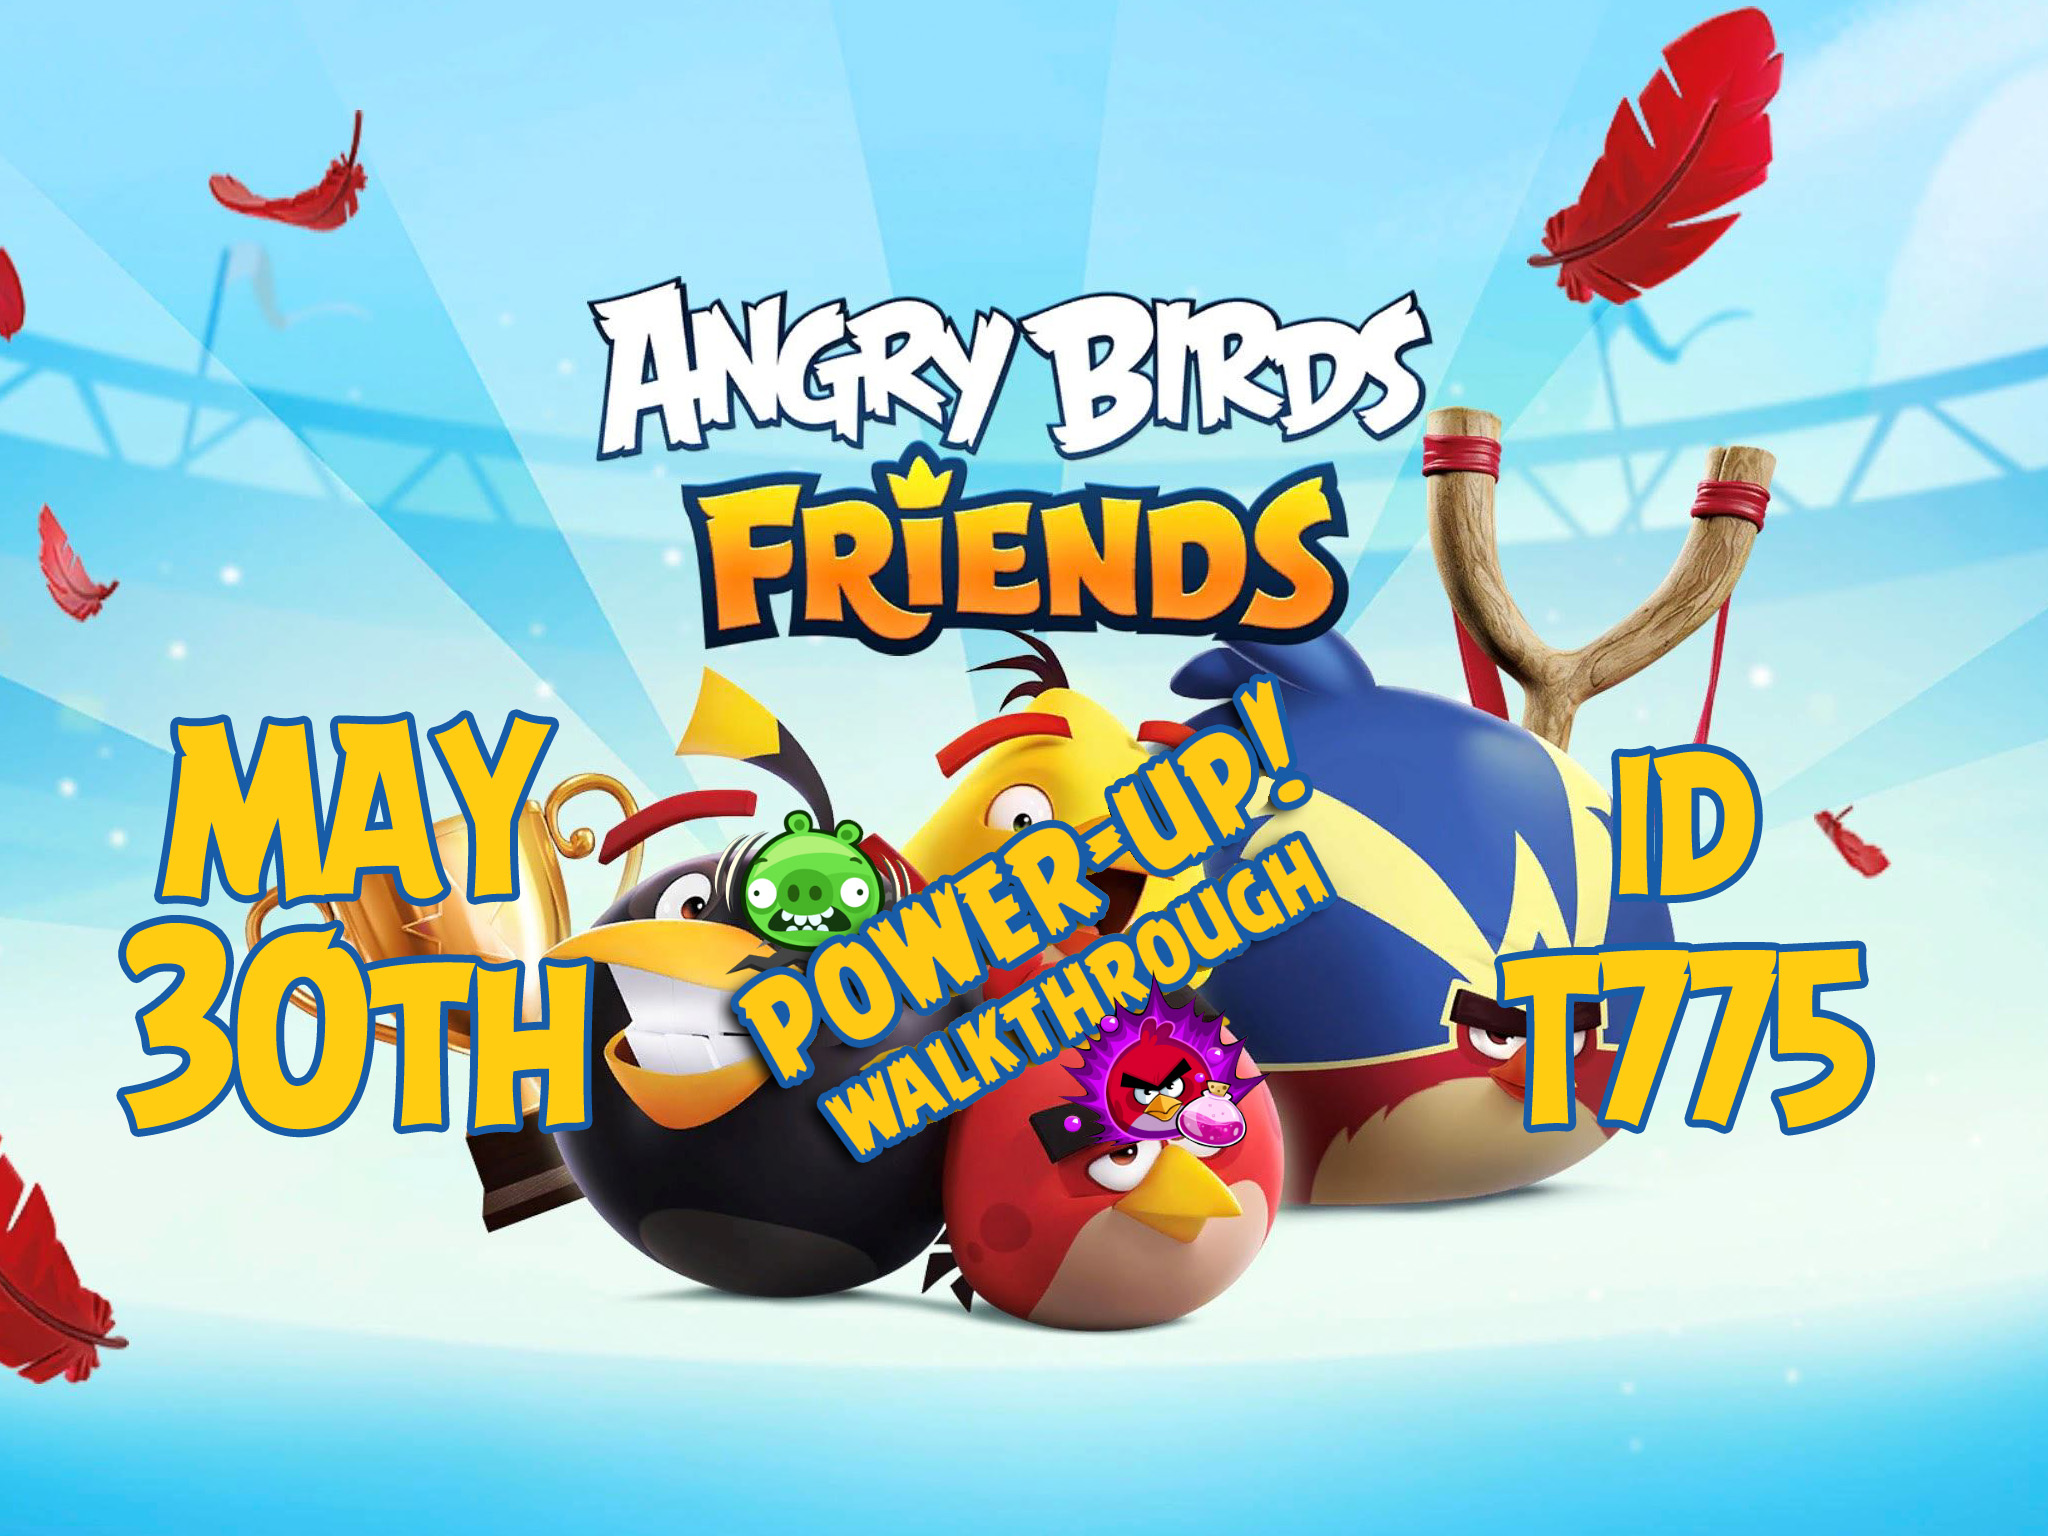 Angry-Birds-Friends-Tournament-T775-Feature-Image-PU